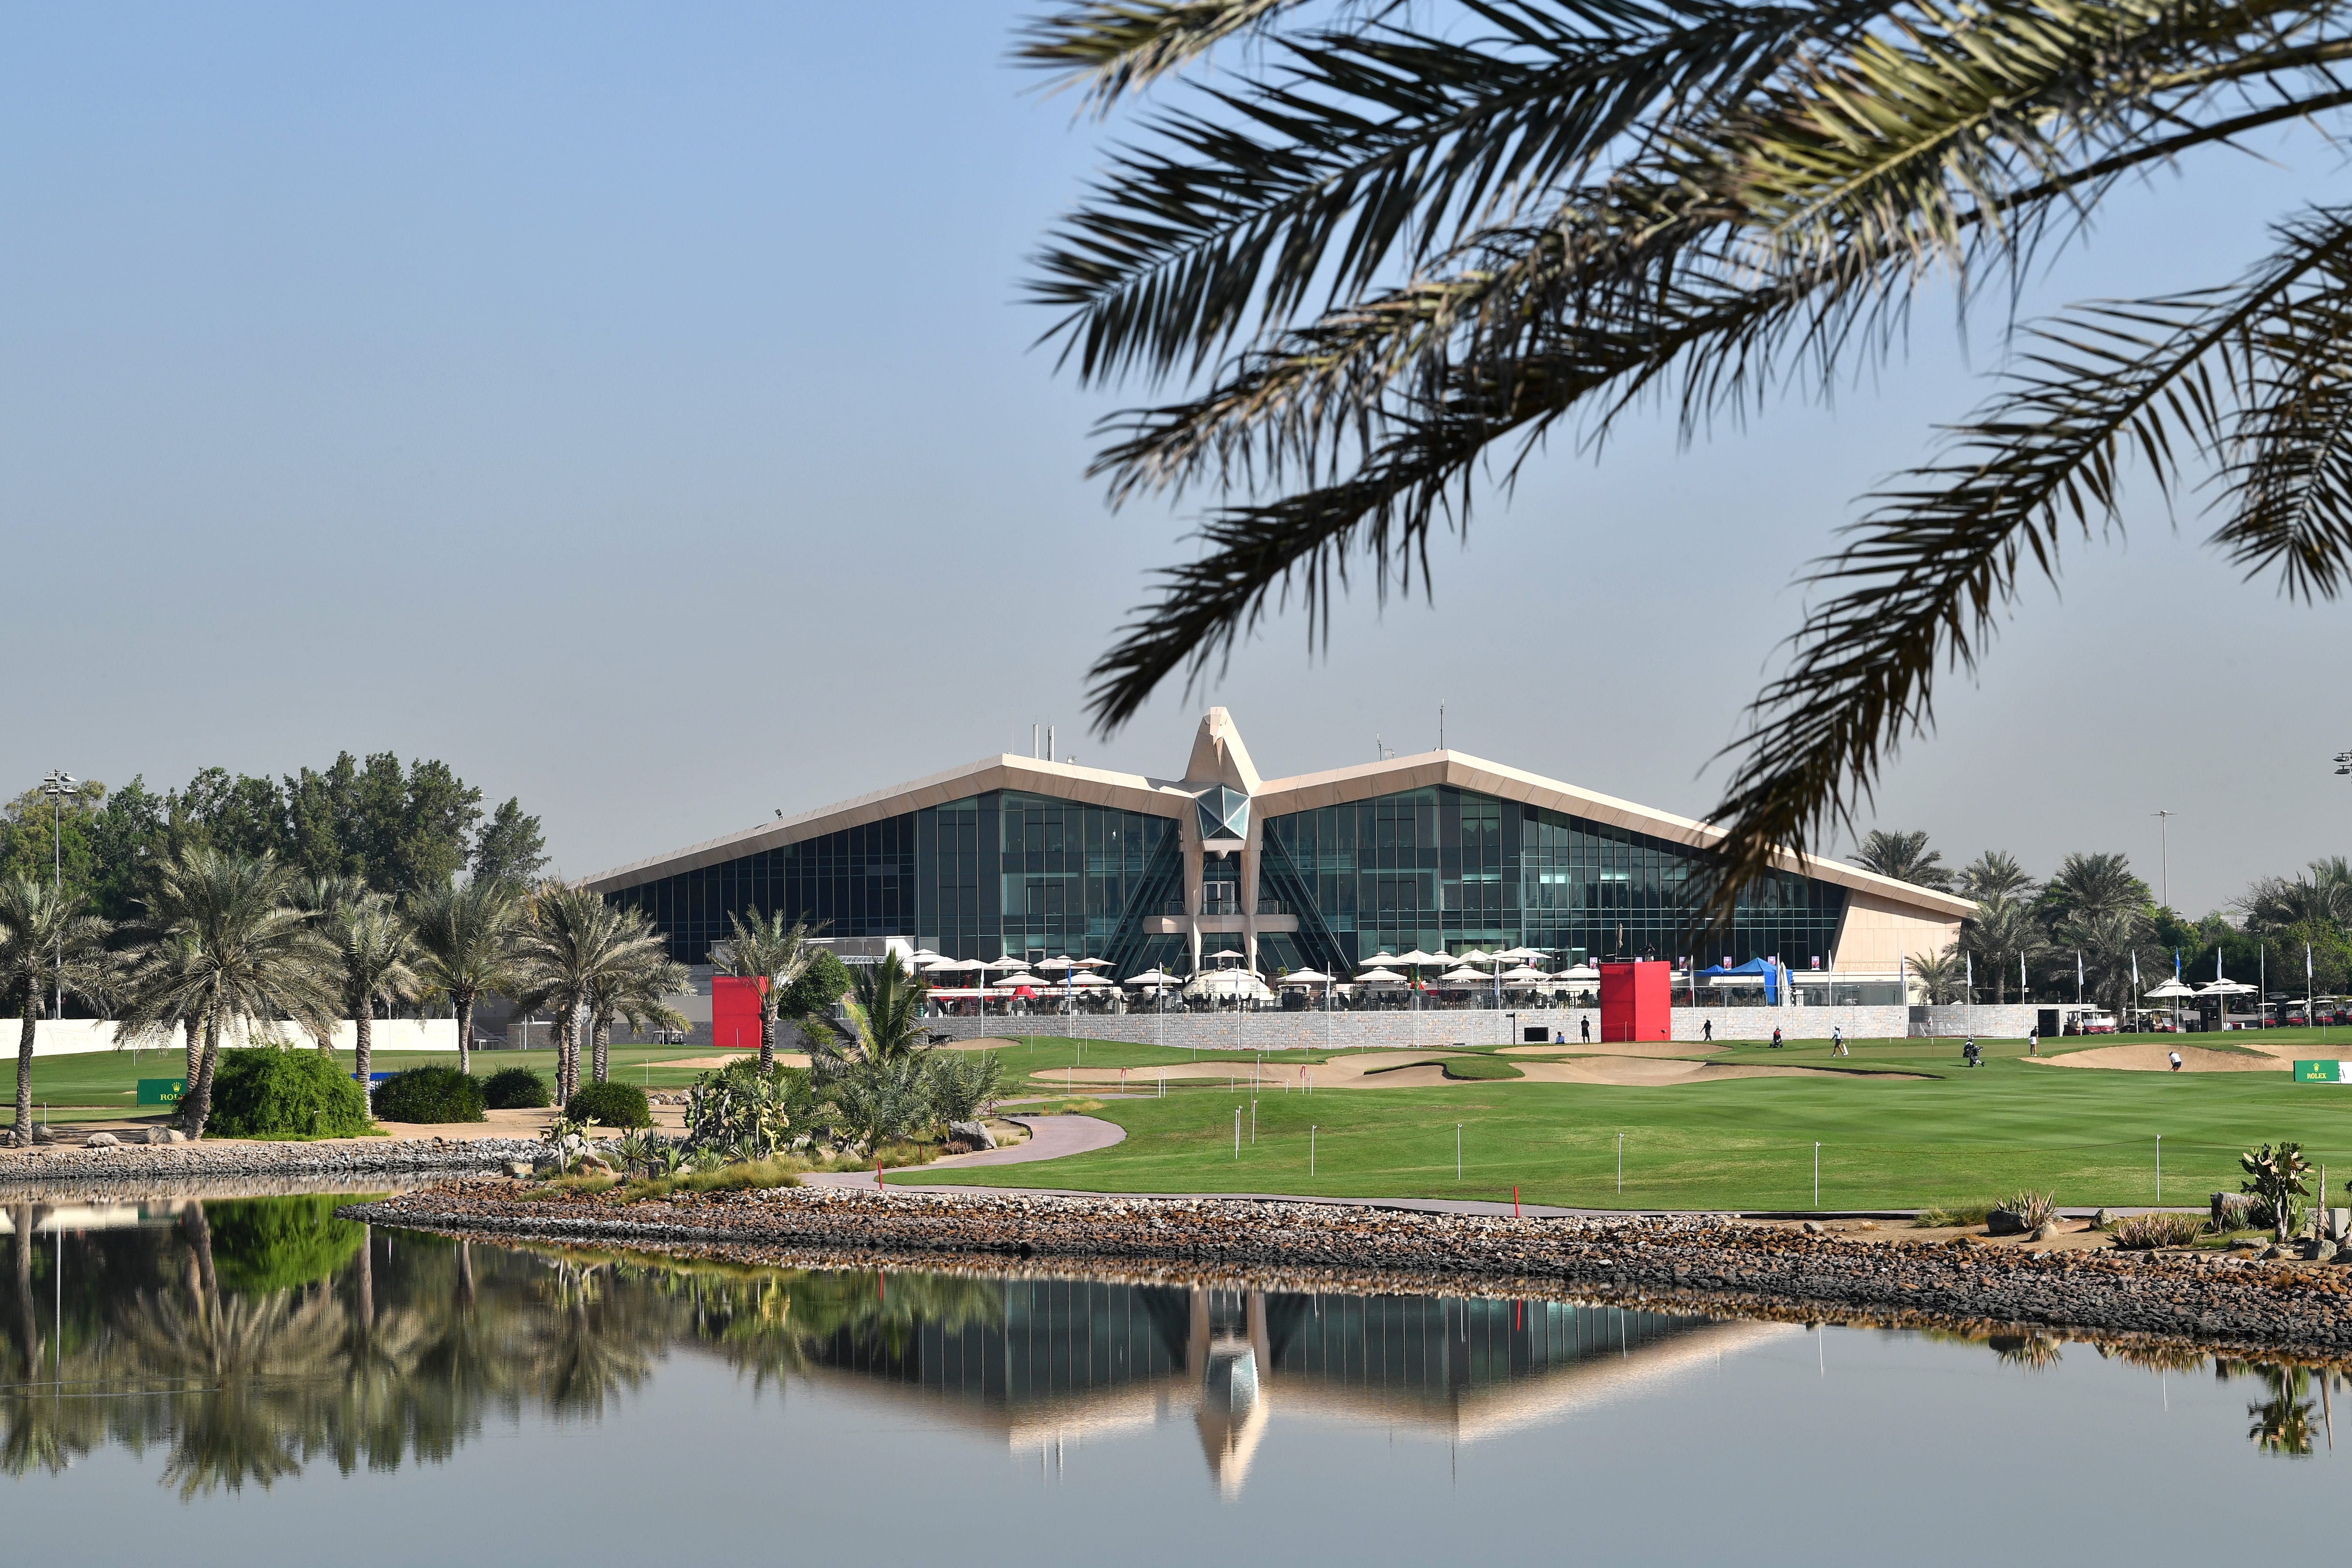 Abu Dhabi Golf Club Poised To Host World’s Top Amateurs In Just One Week’s Time